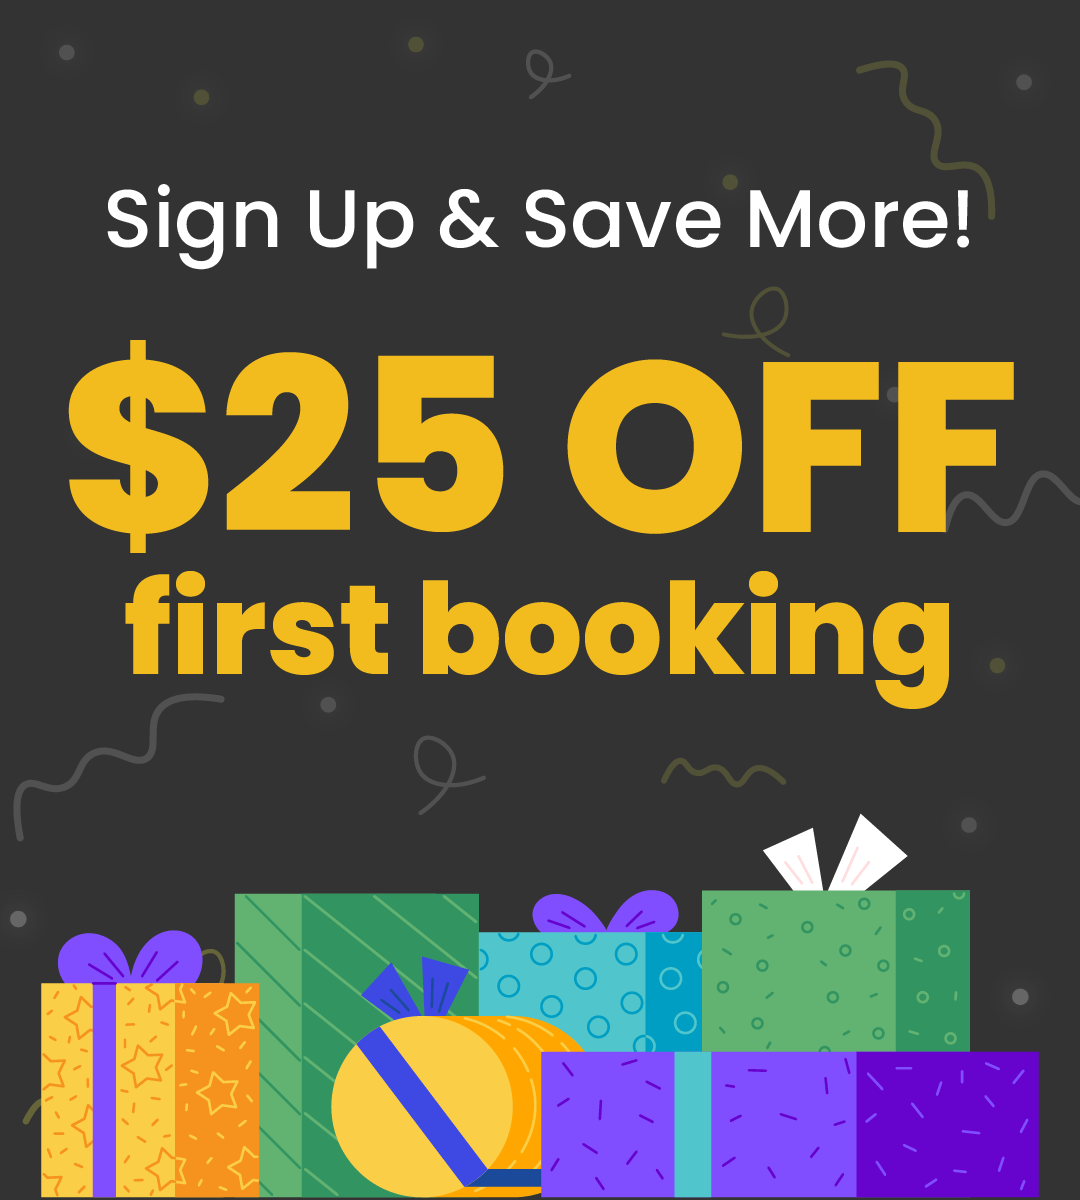 Sign up and get $25 off your first booking!